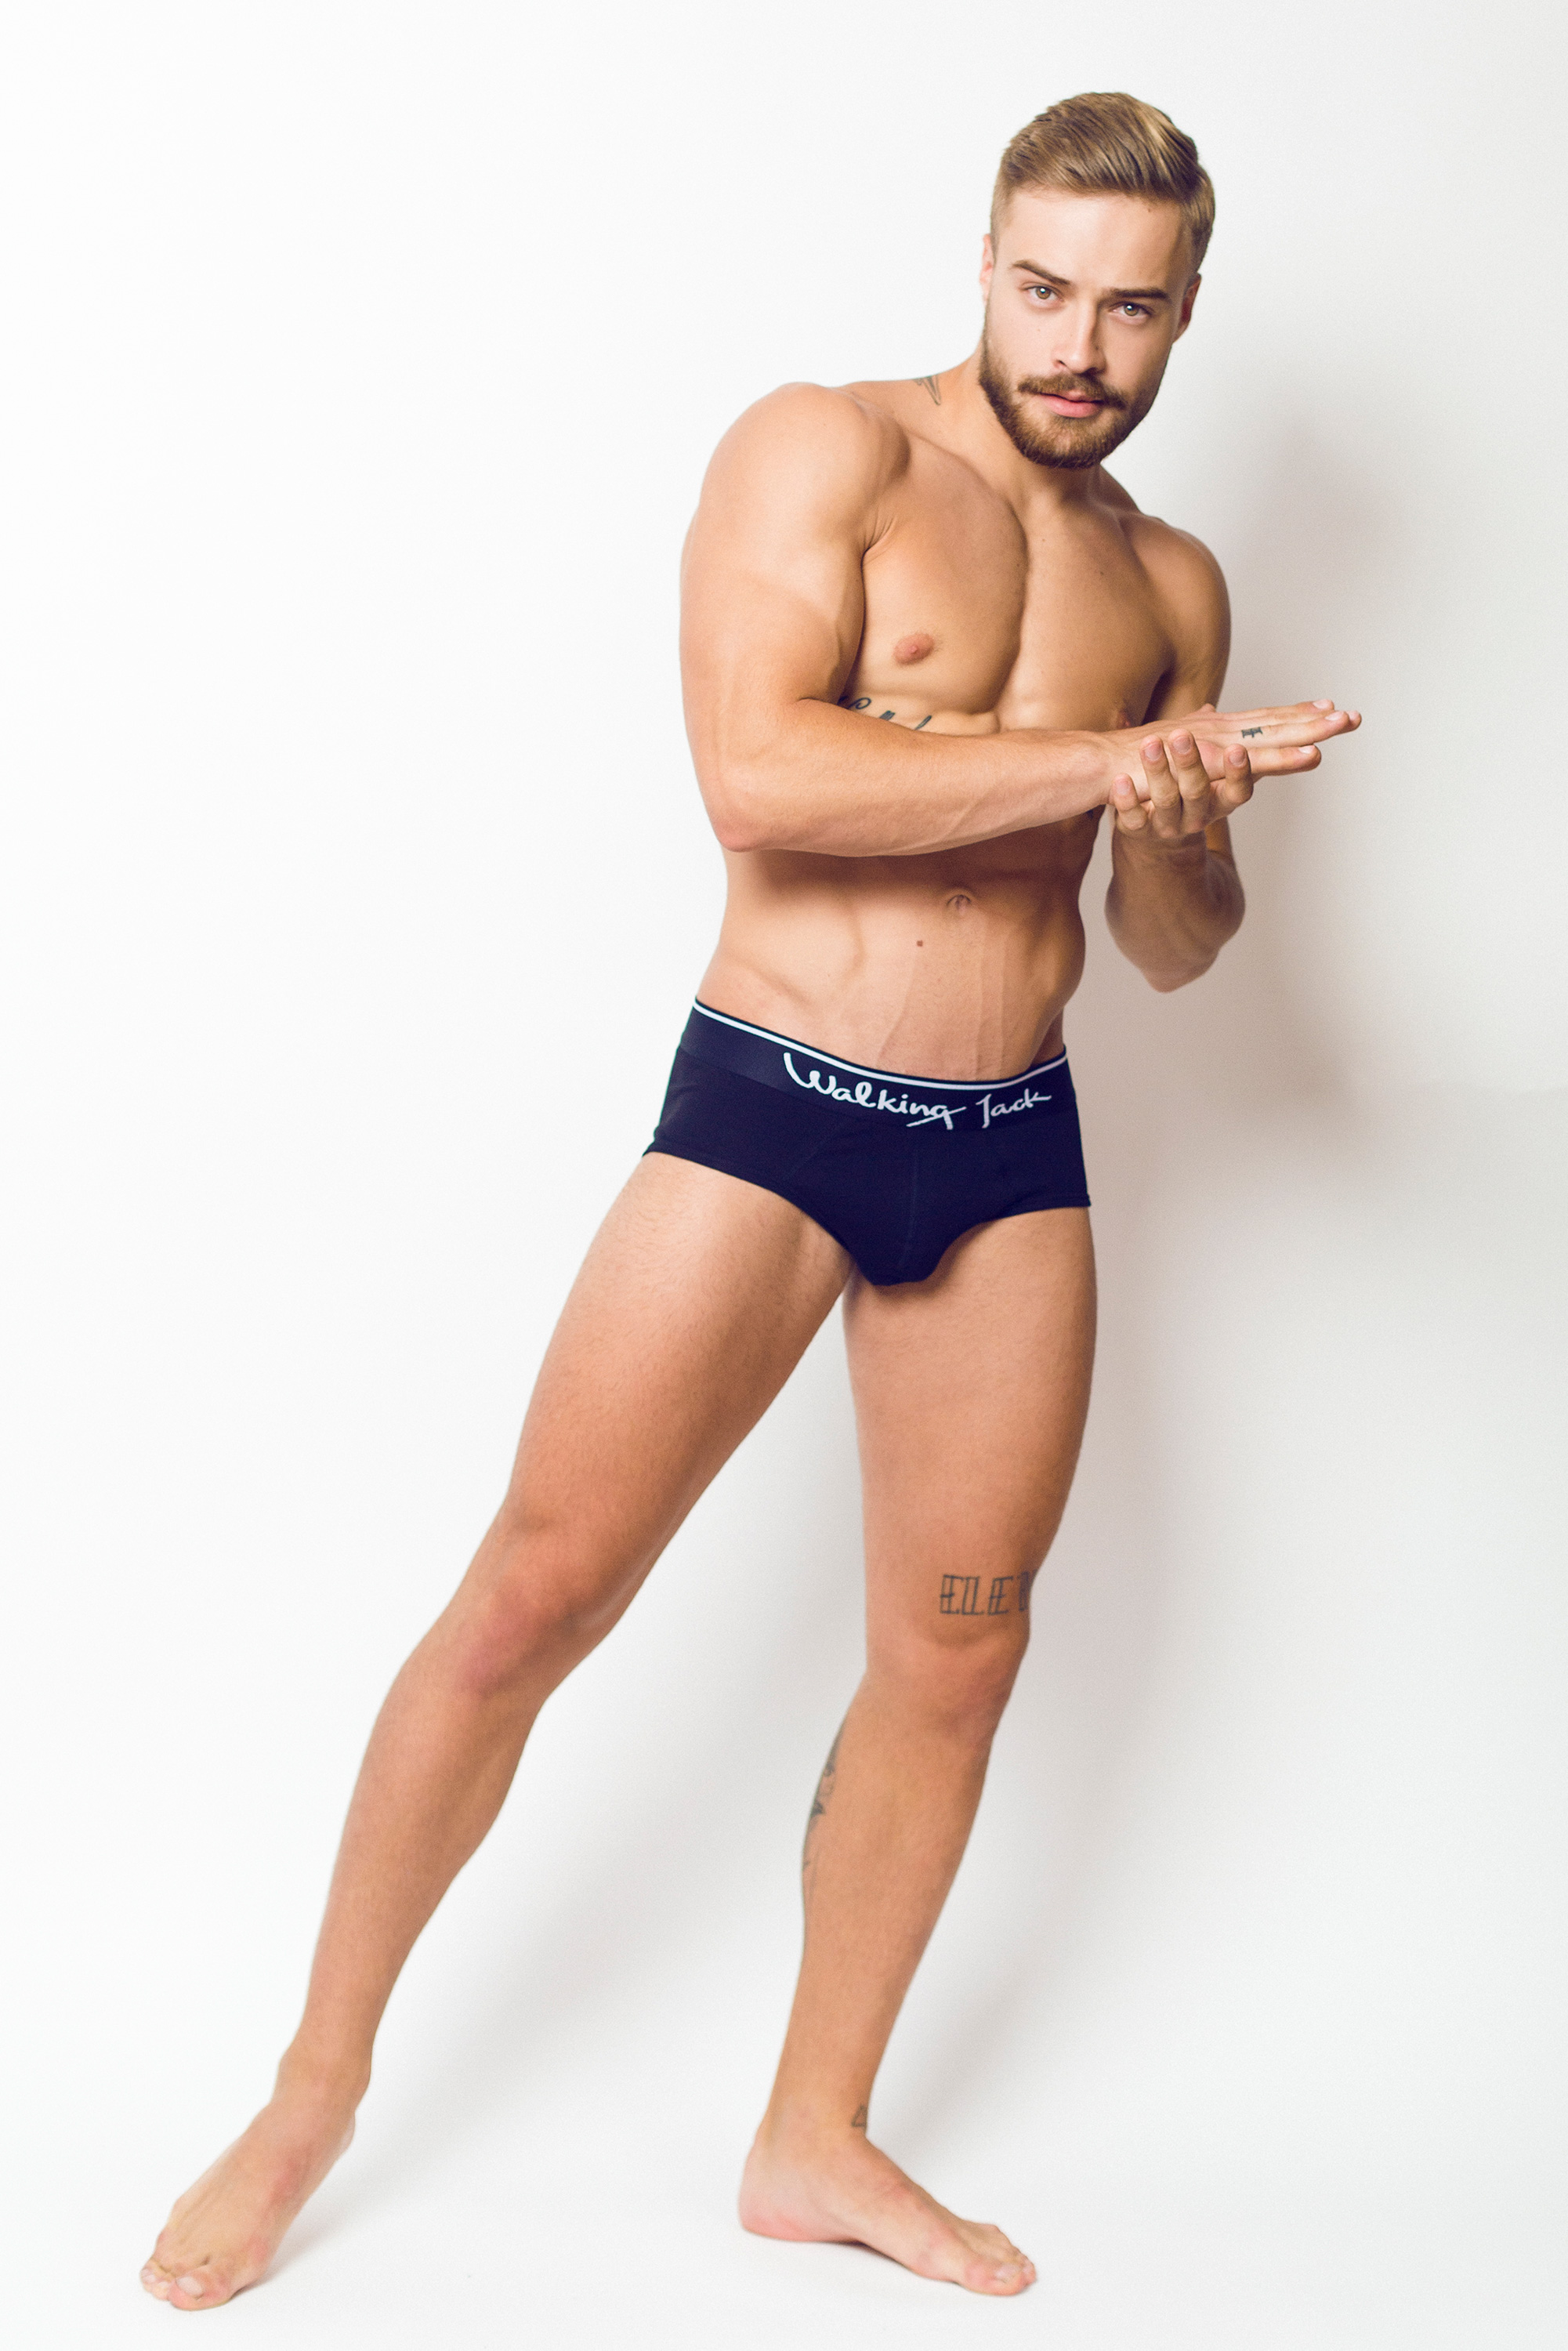 New, Solid Line of Briefs Walking Jack arrived! | Men and underwear